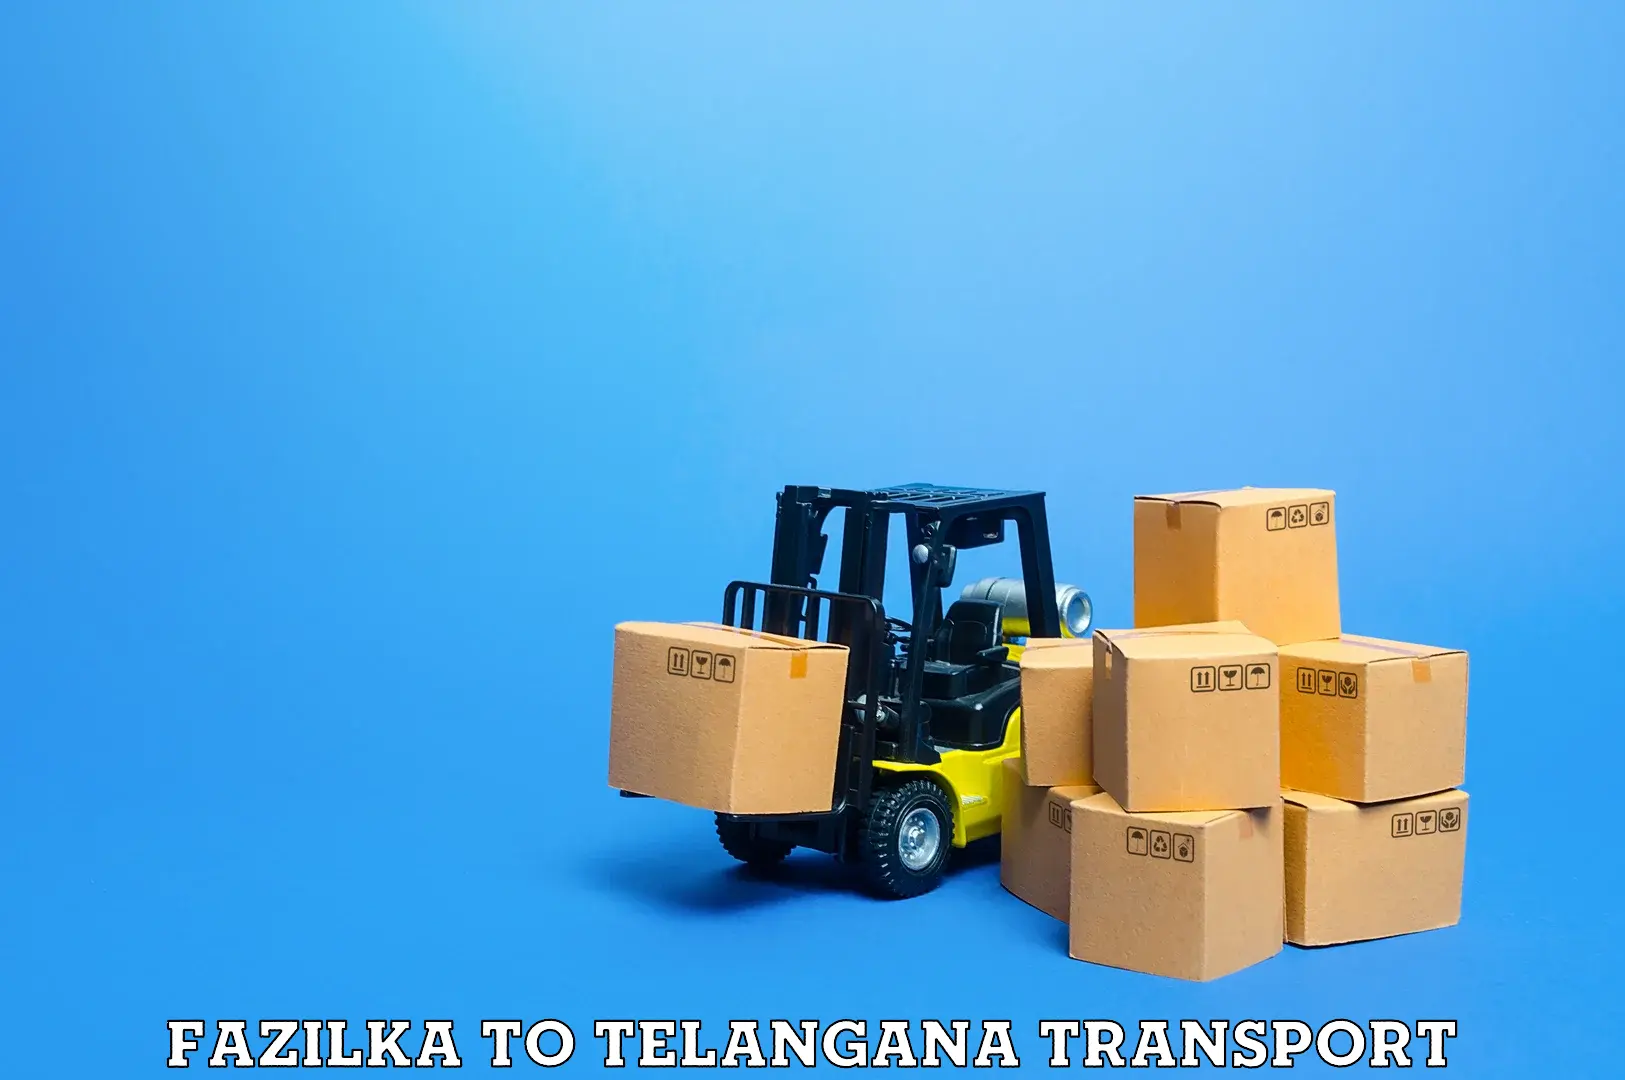 Air freight transport services Fazilka to Sultanabad